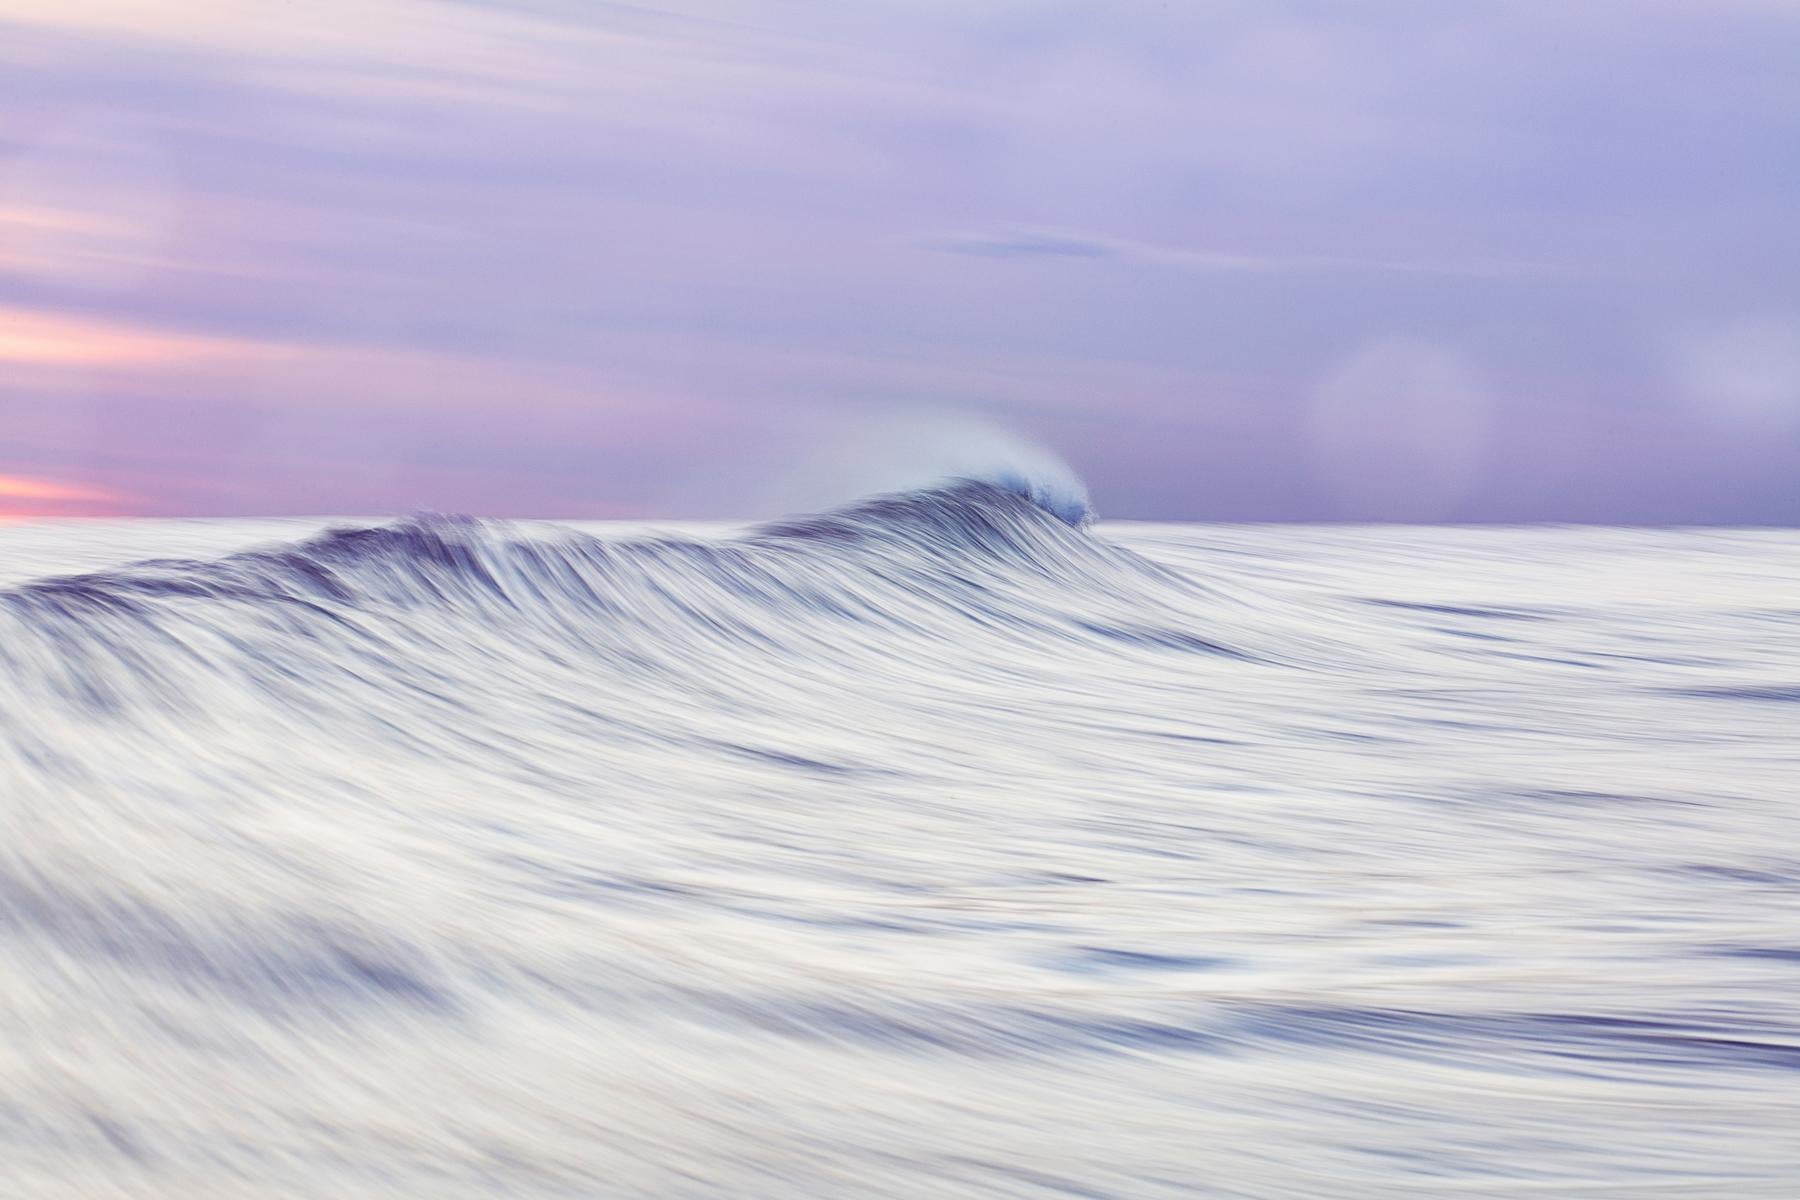 Danny Weiss Abstract Photograph - "In the Deep" Lavender Large Scale Abstract Color Photograph, Waterscape Wave